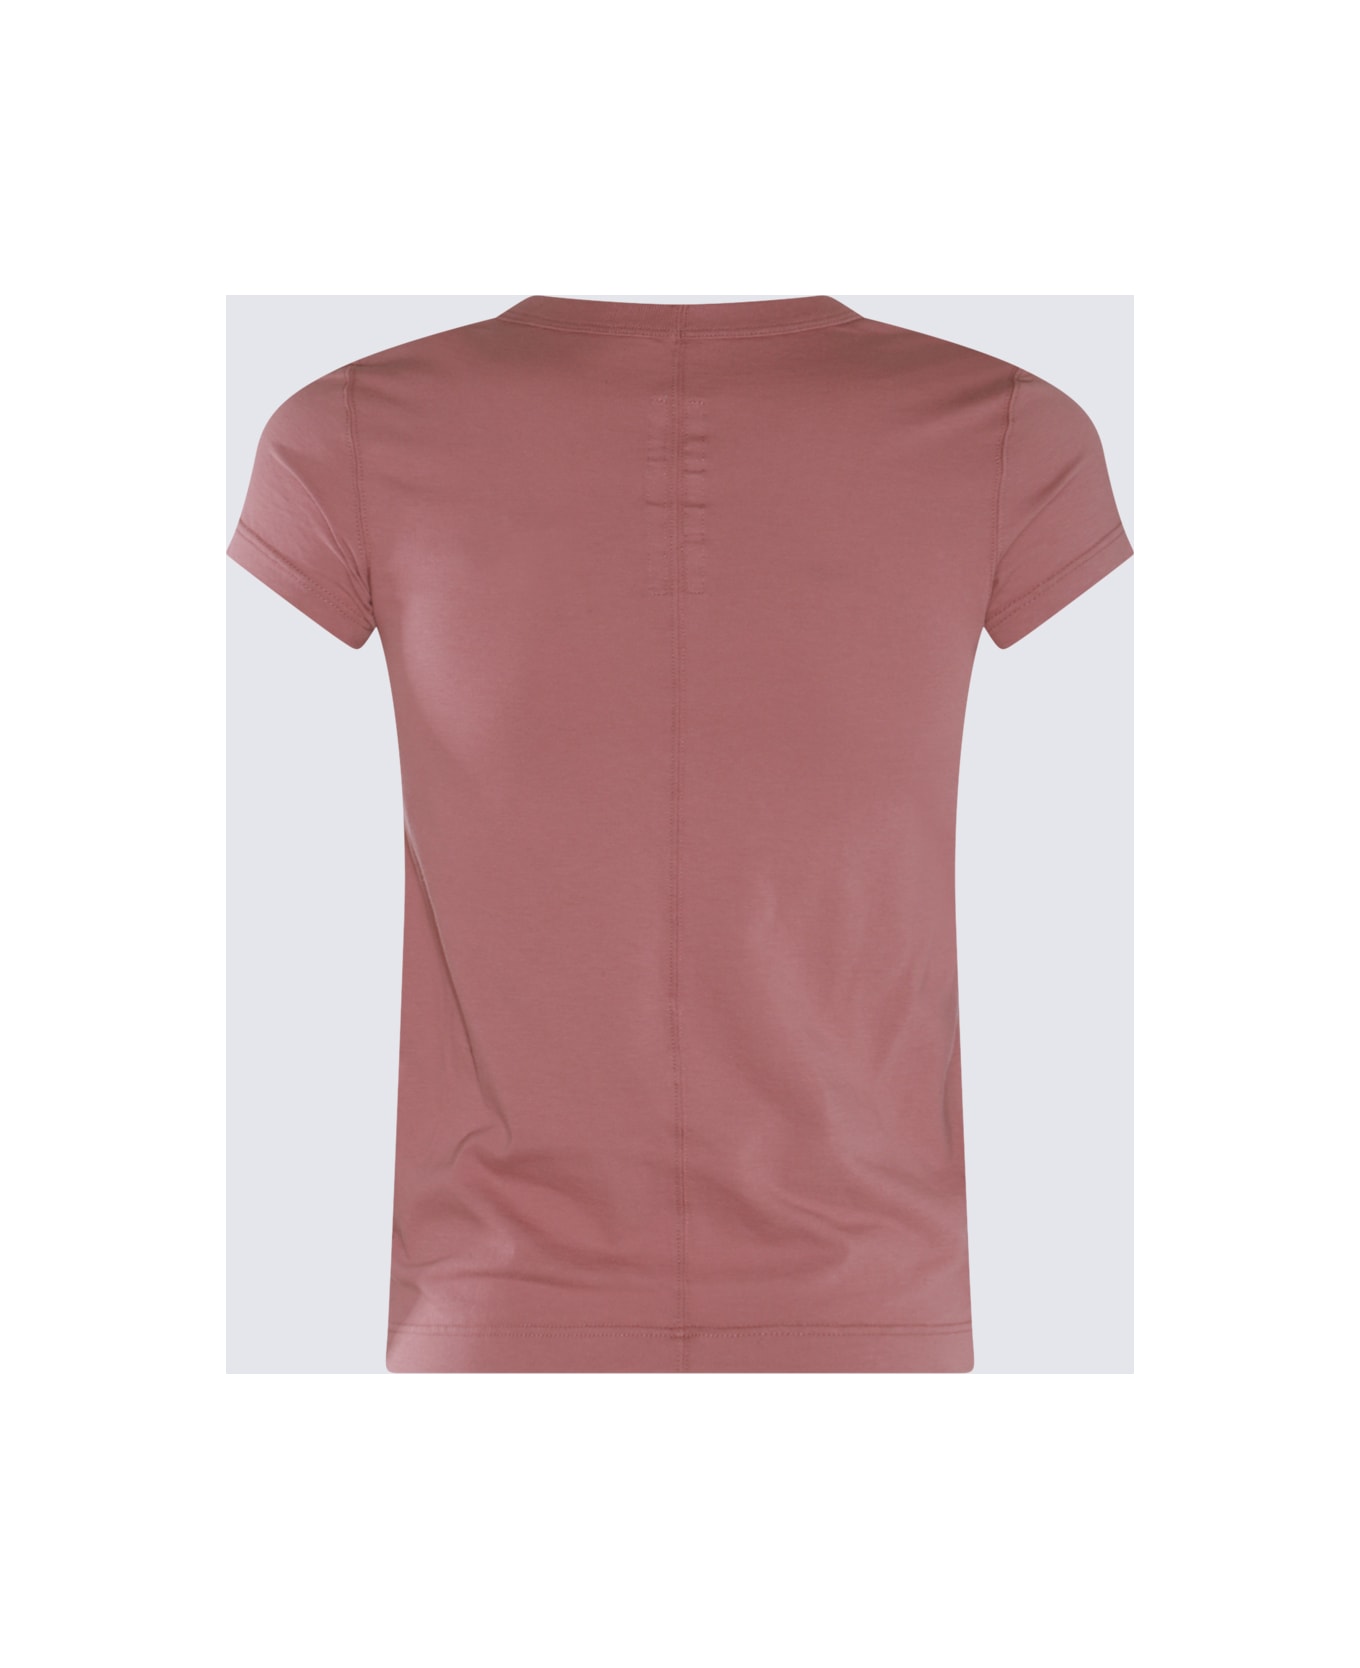 Rick Owens Dusty Pink Cotton T-shirt - DUSTy pink Tシャツ